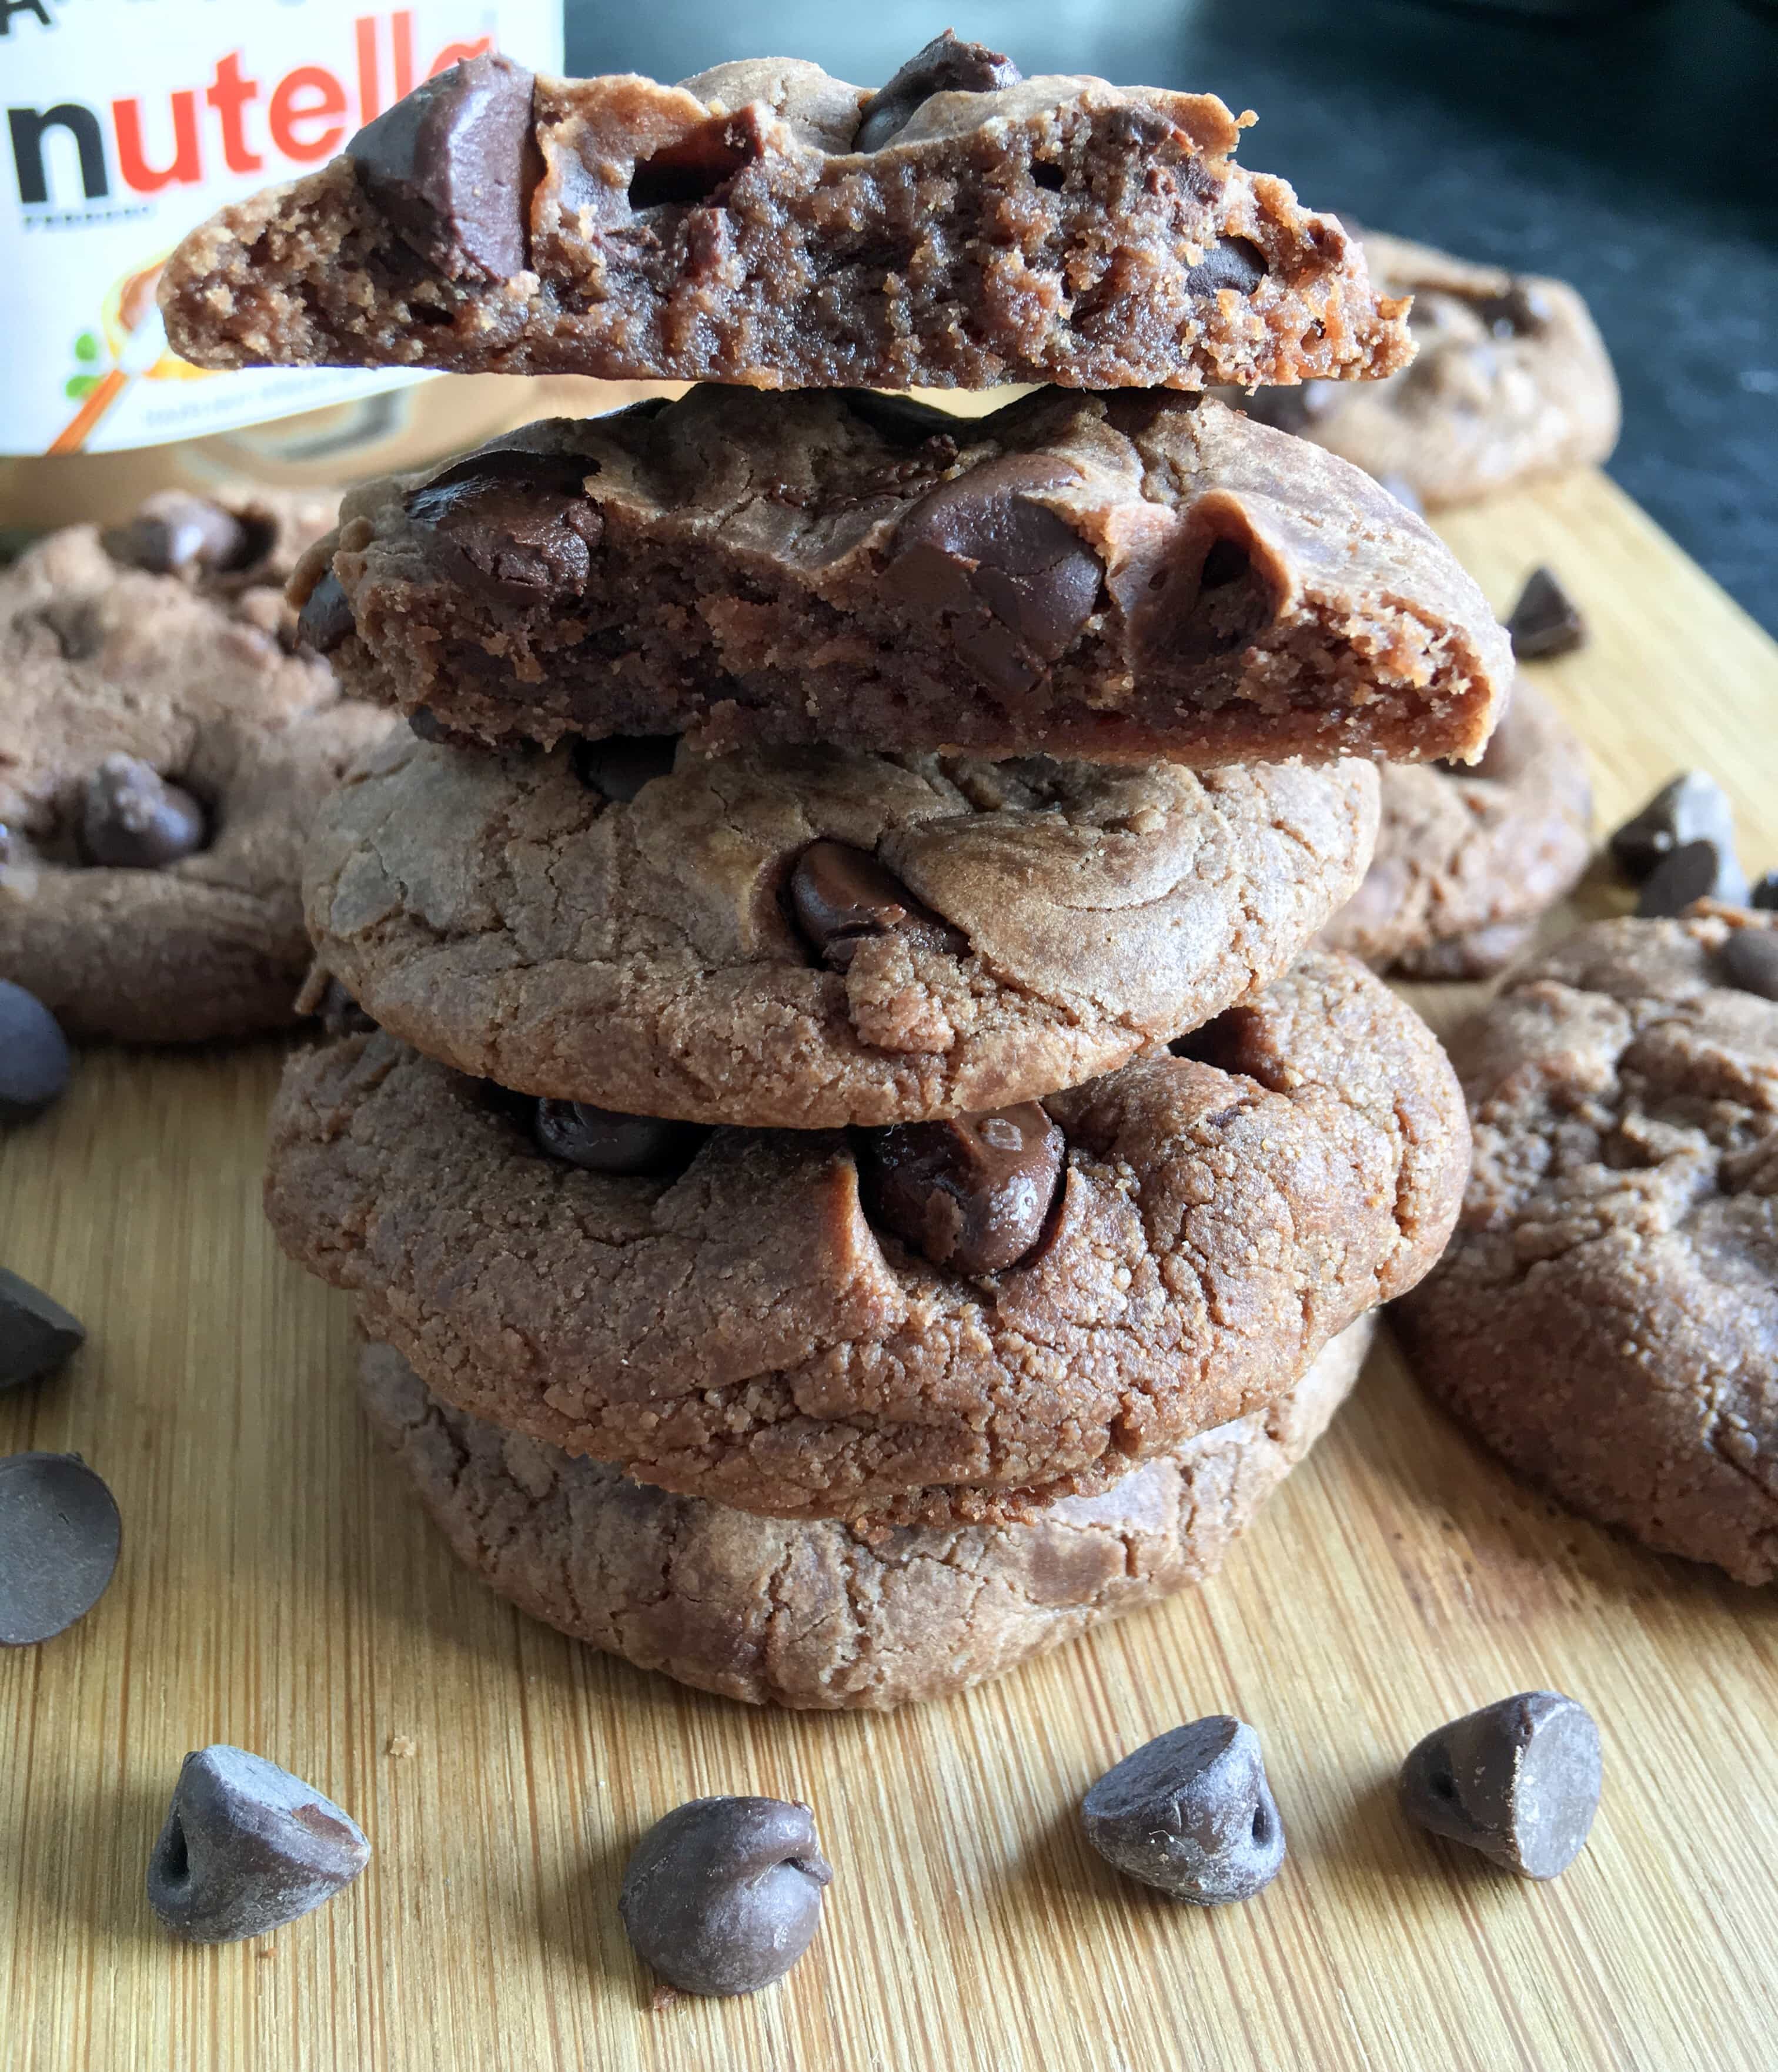 A close up shot of a pile of Nutella cookies with chocolate chips. A jar of Nutella can be partially seen in the background.